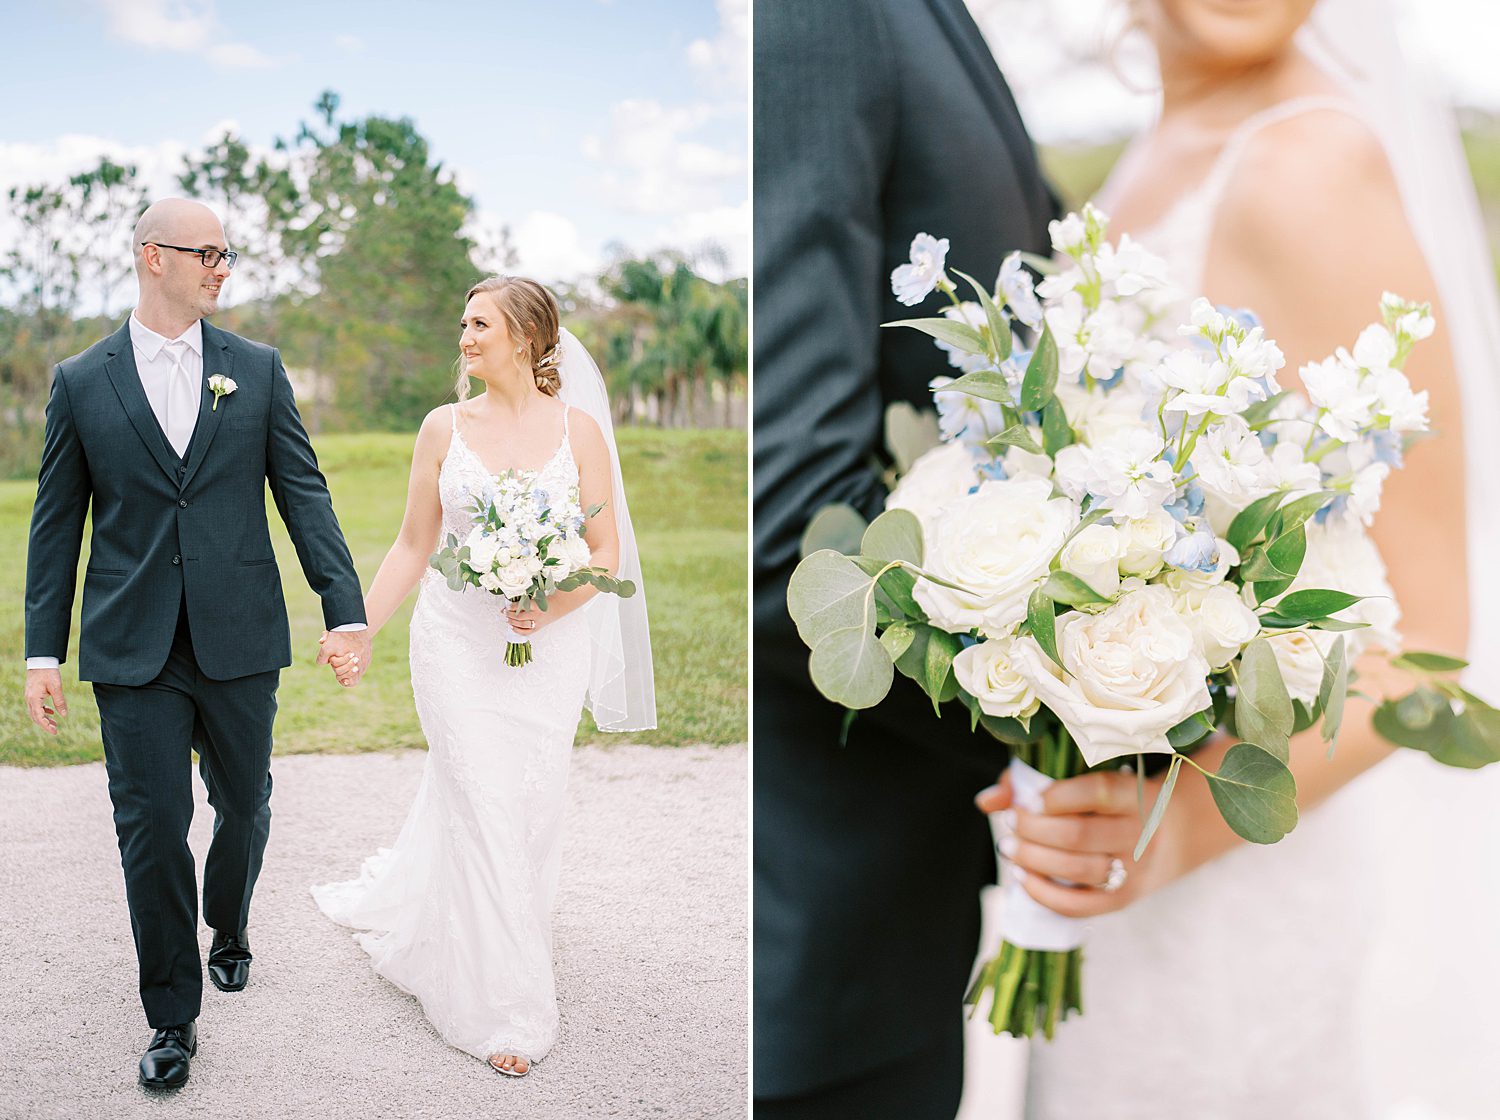 newlyweds hold hands while bride carries bouquet of white flowers